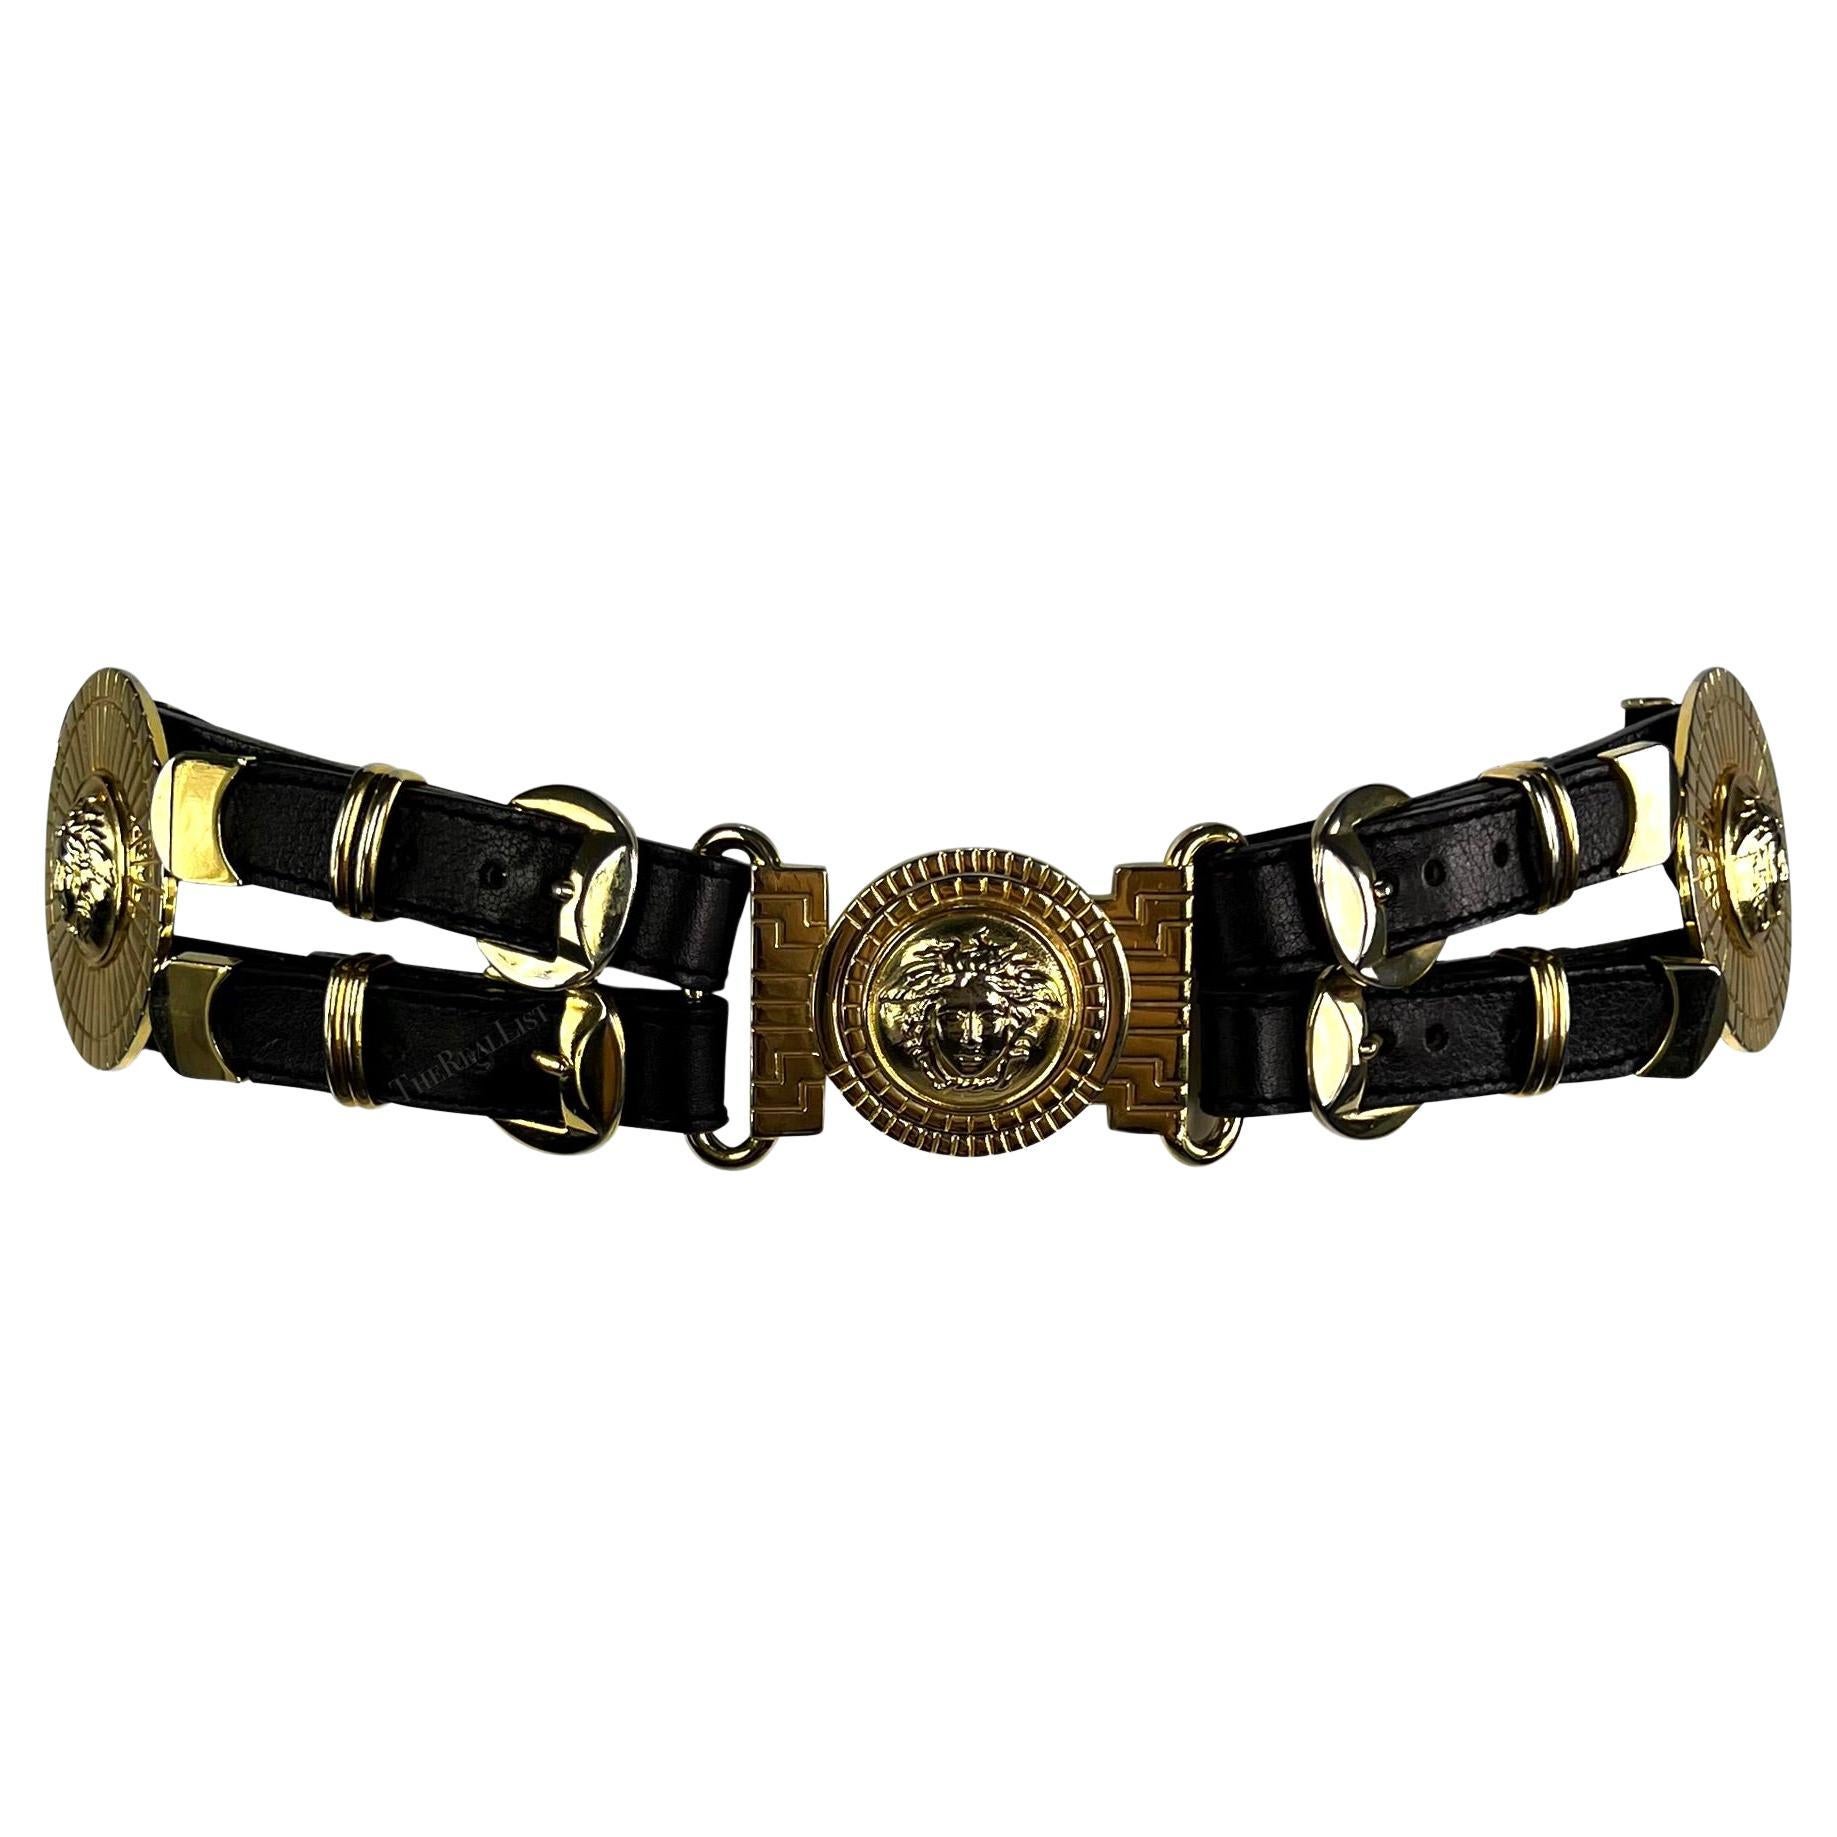 F/W 1992 Gianni Versace Runway 'Miss S&M' Double Medallion Medusa Bondage Belt In Excellent Condition For Sale In West Hollywood, CA